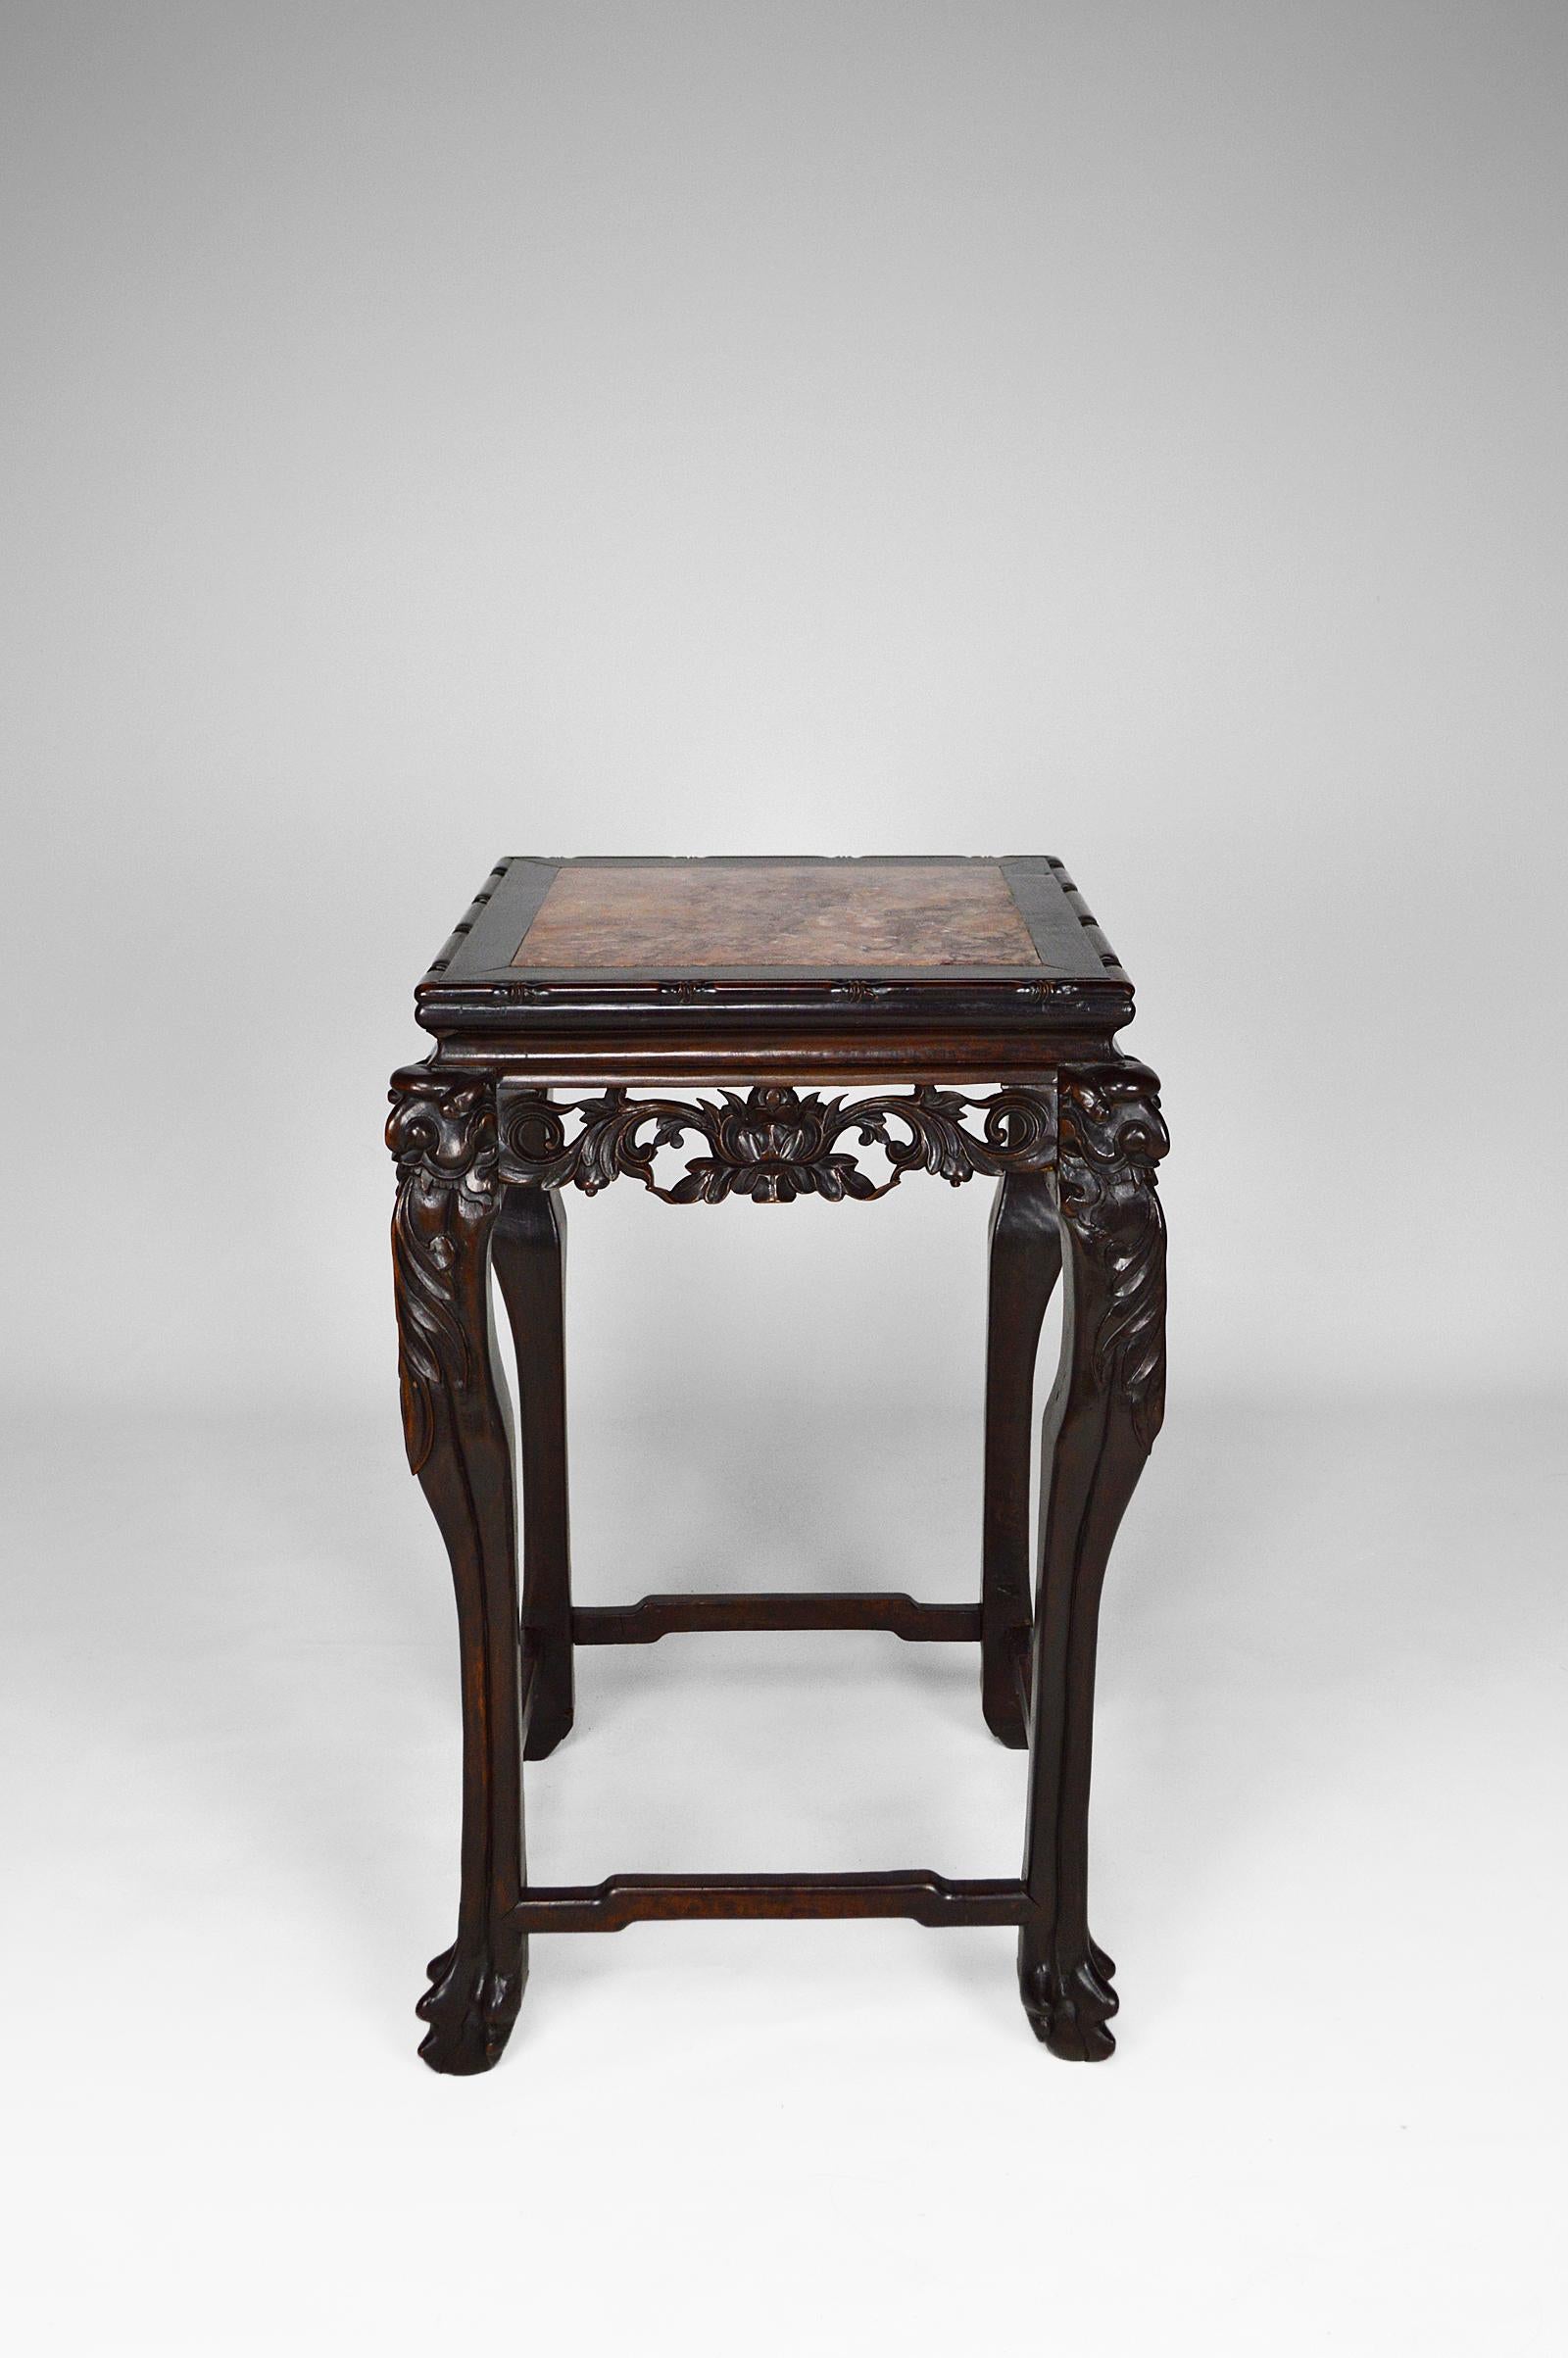 Superb side table / gueridon / pedestal table in carved solid wood. 

The sculptures represent dragons / demons, legs of tigers / lions and flowers (lotus ?).
The top is in pink marble.

Chinoiserie / Chinese Export, Asia, South China or former